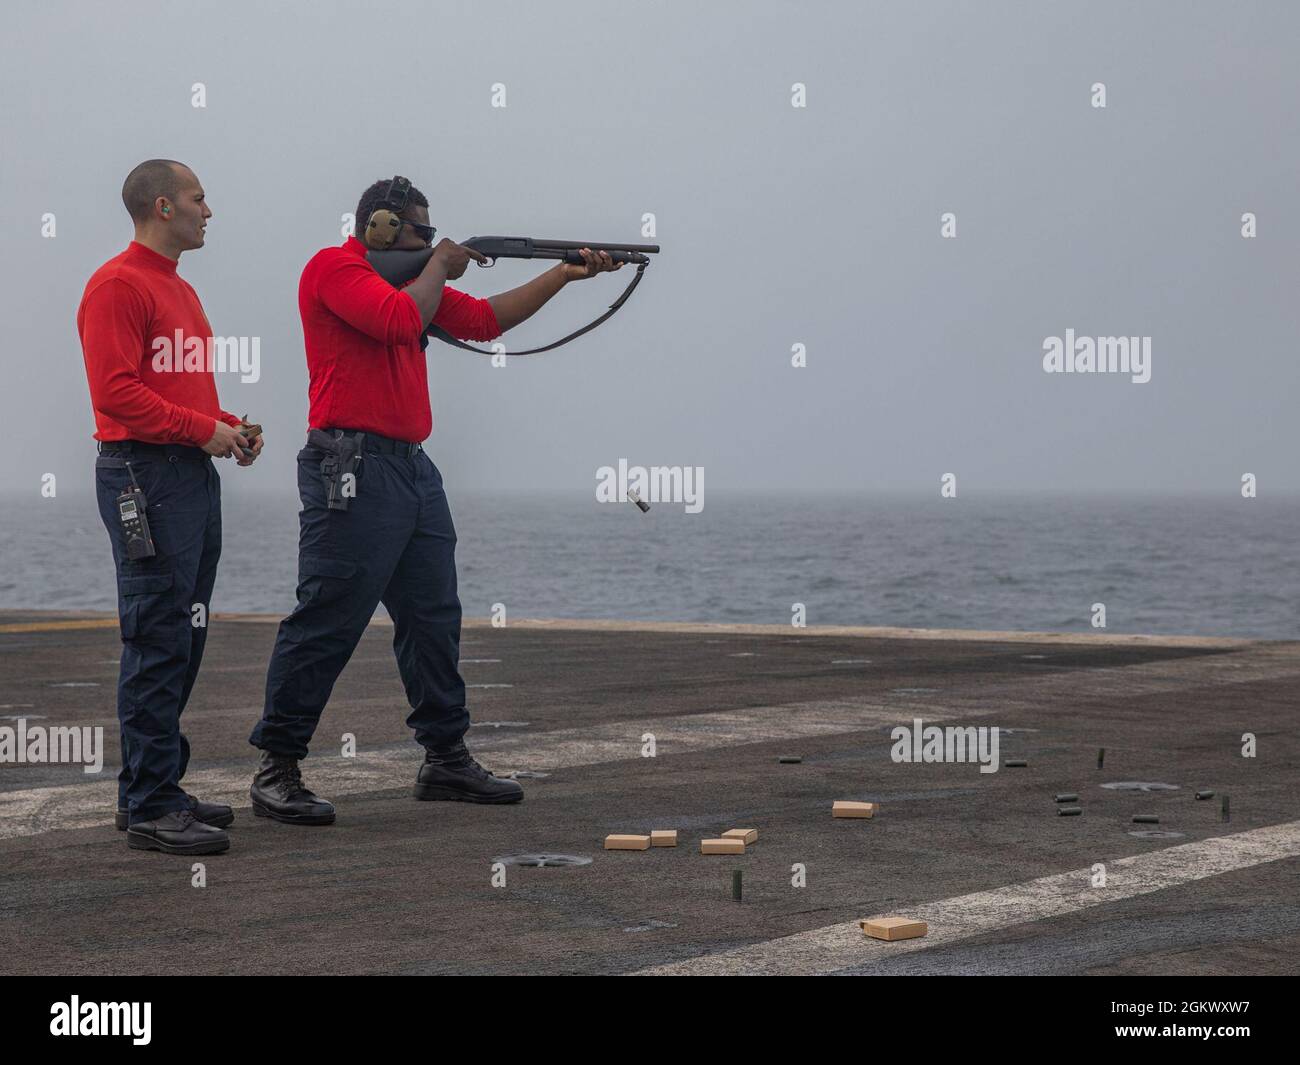 210713-N-NY362-1046 GULF OF ADEN (July 13, 2020) – Master-at-Arms 1st Class Belisario Salas, left, observes Master-at-Arms 3rd Class Lenny Lee as he fires an M500 shotgun during a live-fire exercise aboard aircraft carrier USS Ronald Reagan (CVN 76) in the Gulf of Aden, July 13. Ronald Reagan is deployed to the U.S. 5th Fleet area of operations in support of naval operations to ensure maritime stability and security in the Central Region, connecting the Mediterranean and the Pacific through the western Indian Ocean and three strategic choke points. Stock Photo